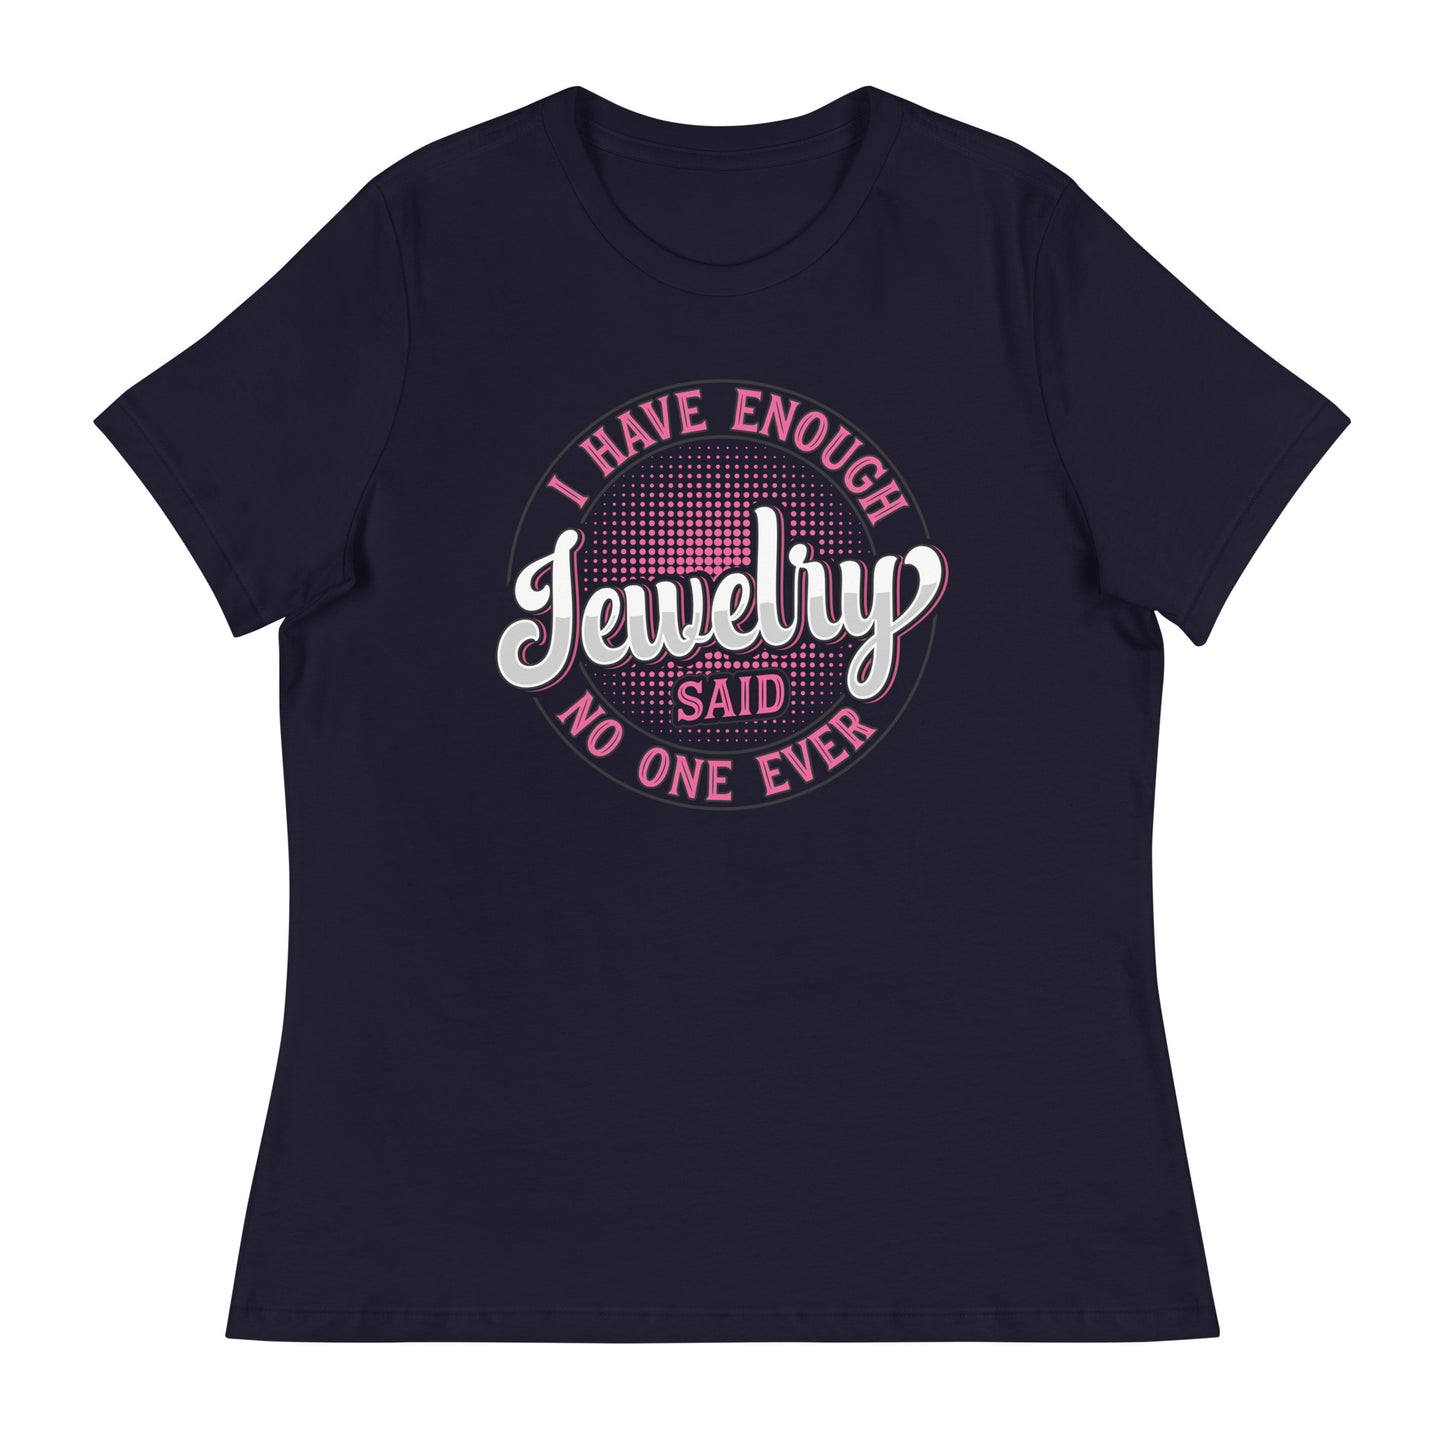 "I Have Enough Jewelry Said No One Ever" Quote Relaxed T-Shirt